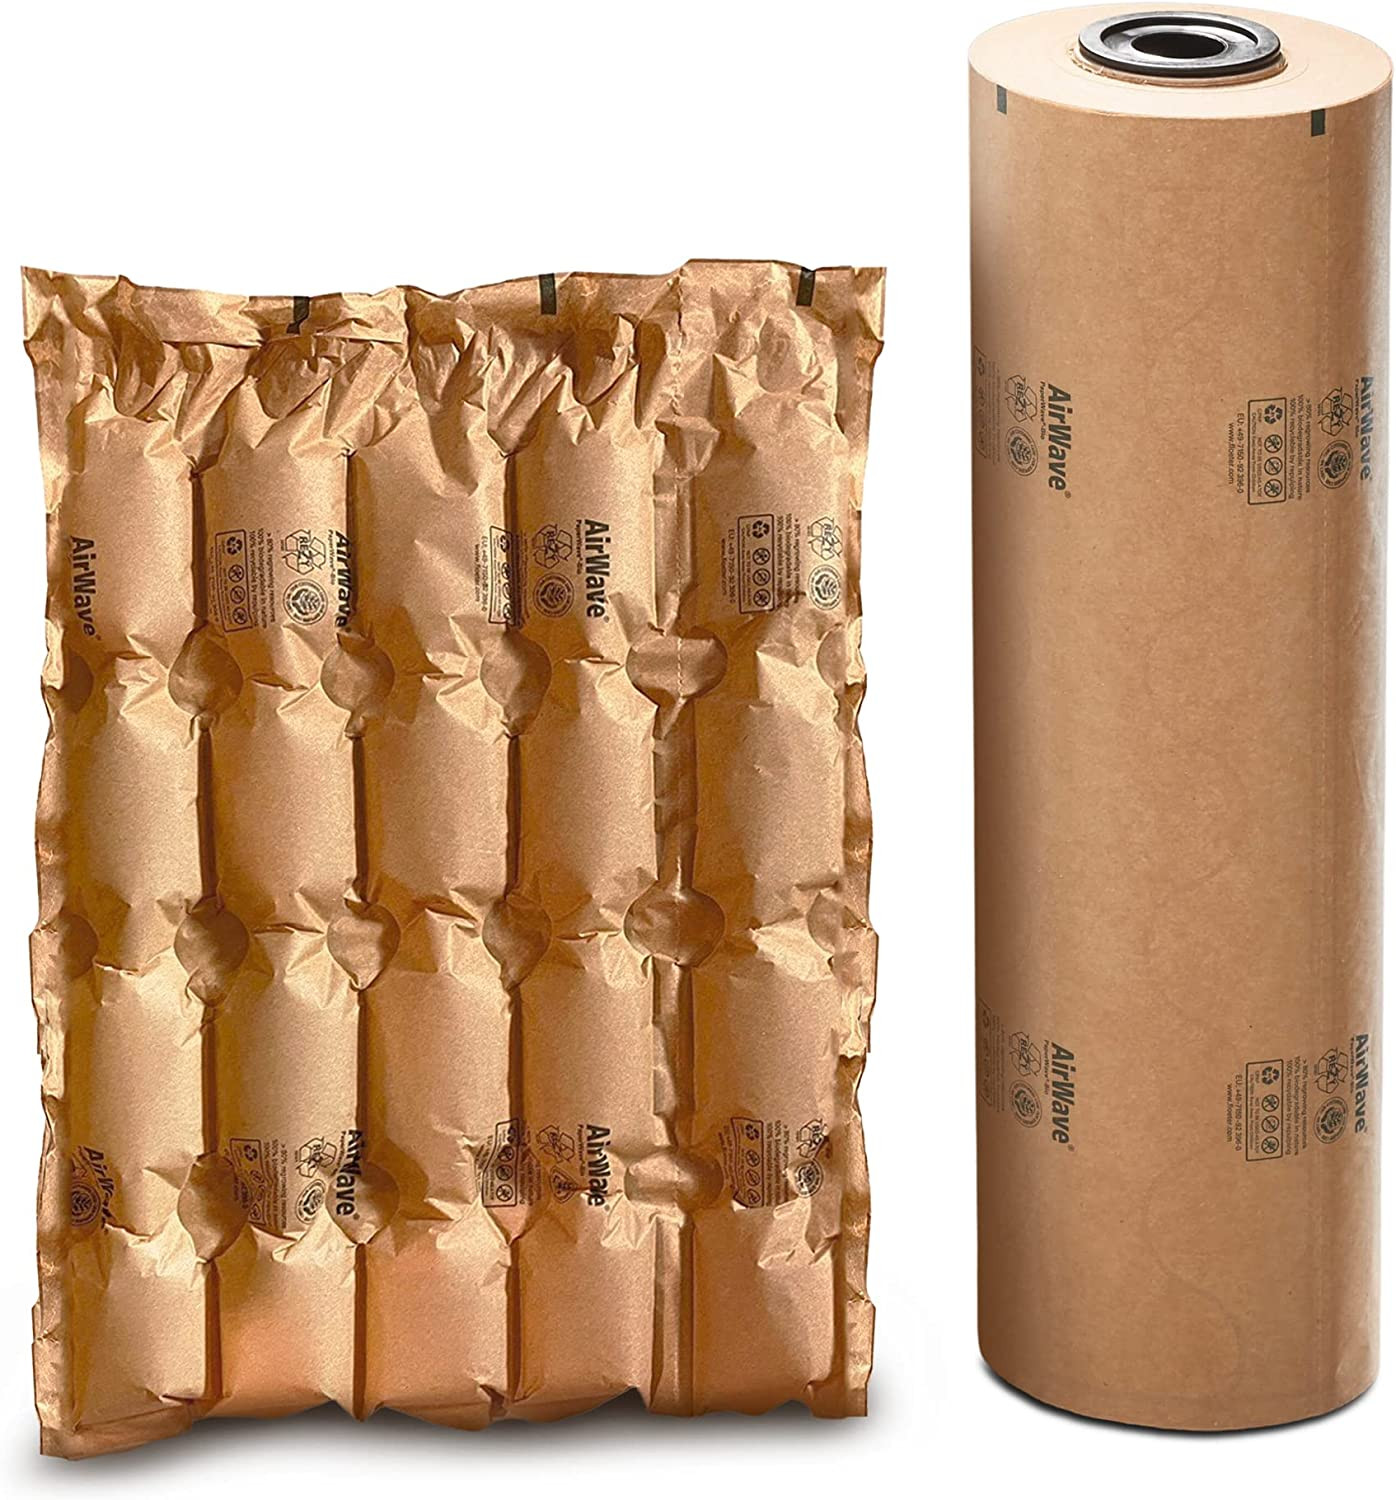 IDL Packaging Large Brown Kraft Paper Roll 18 x 1200' - Natural Kraft  Wrapping Paper for Packing - Perfect Kraft Paper for Void Filling - Kraft  Paper